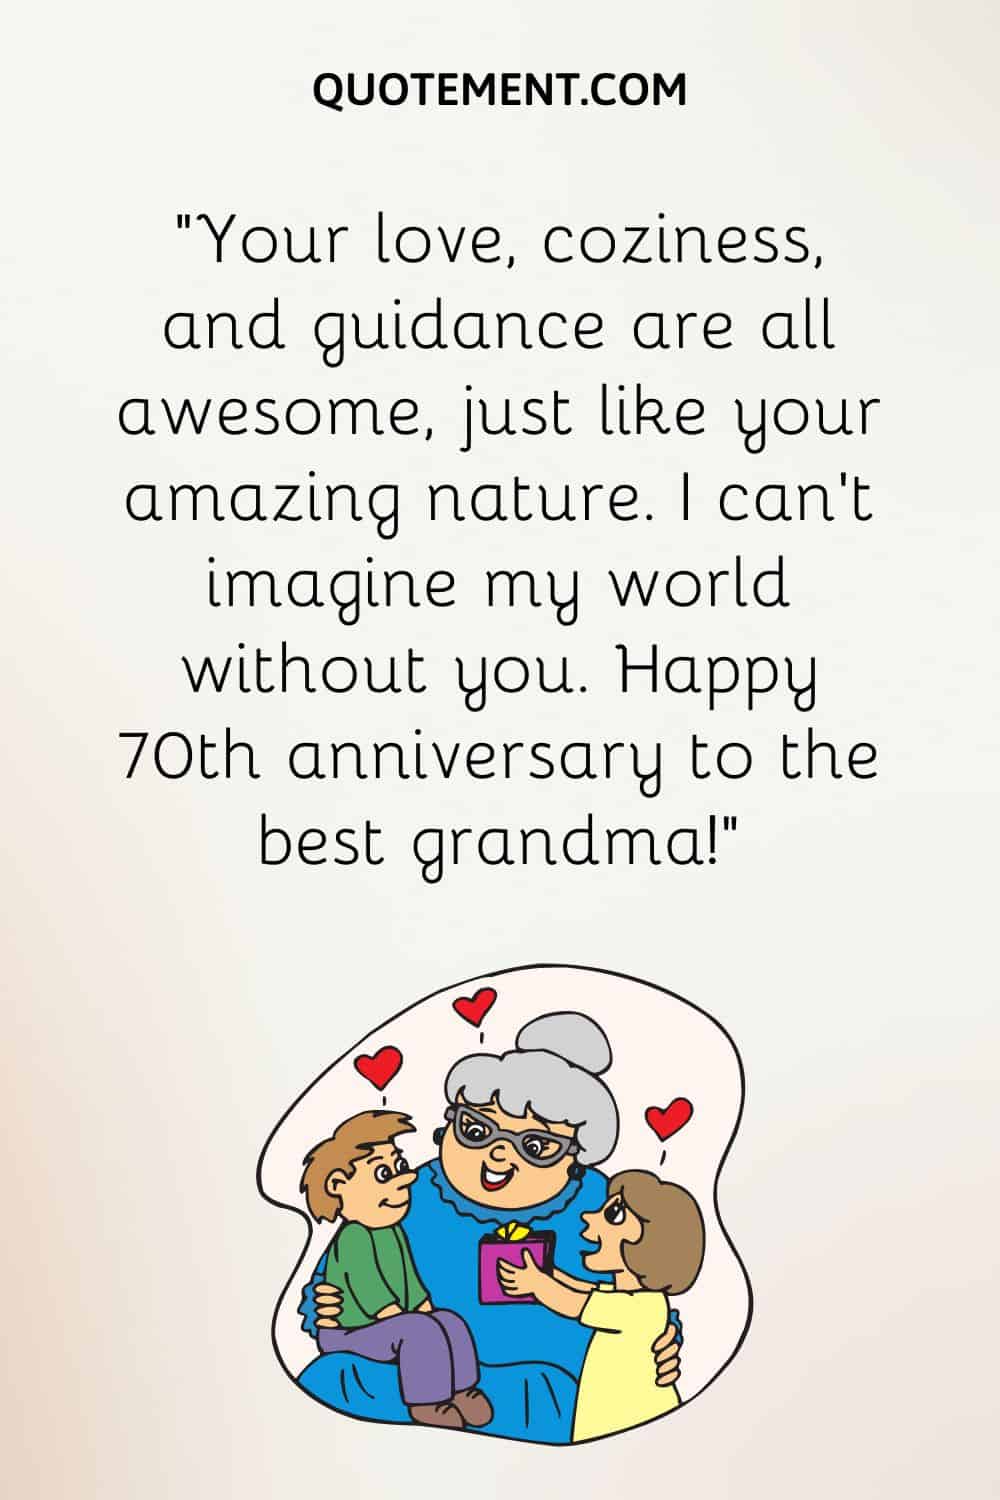 “Your love, coziness, and guidance are all awesome, just like your amazing nature. I can’t imagine my world without you. Happy 70th anniversary to the best grandma!”